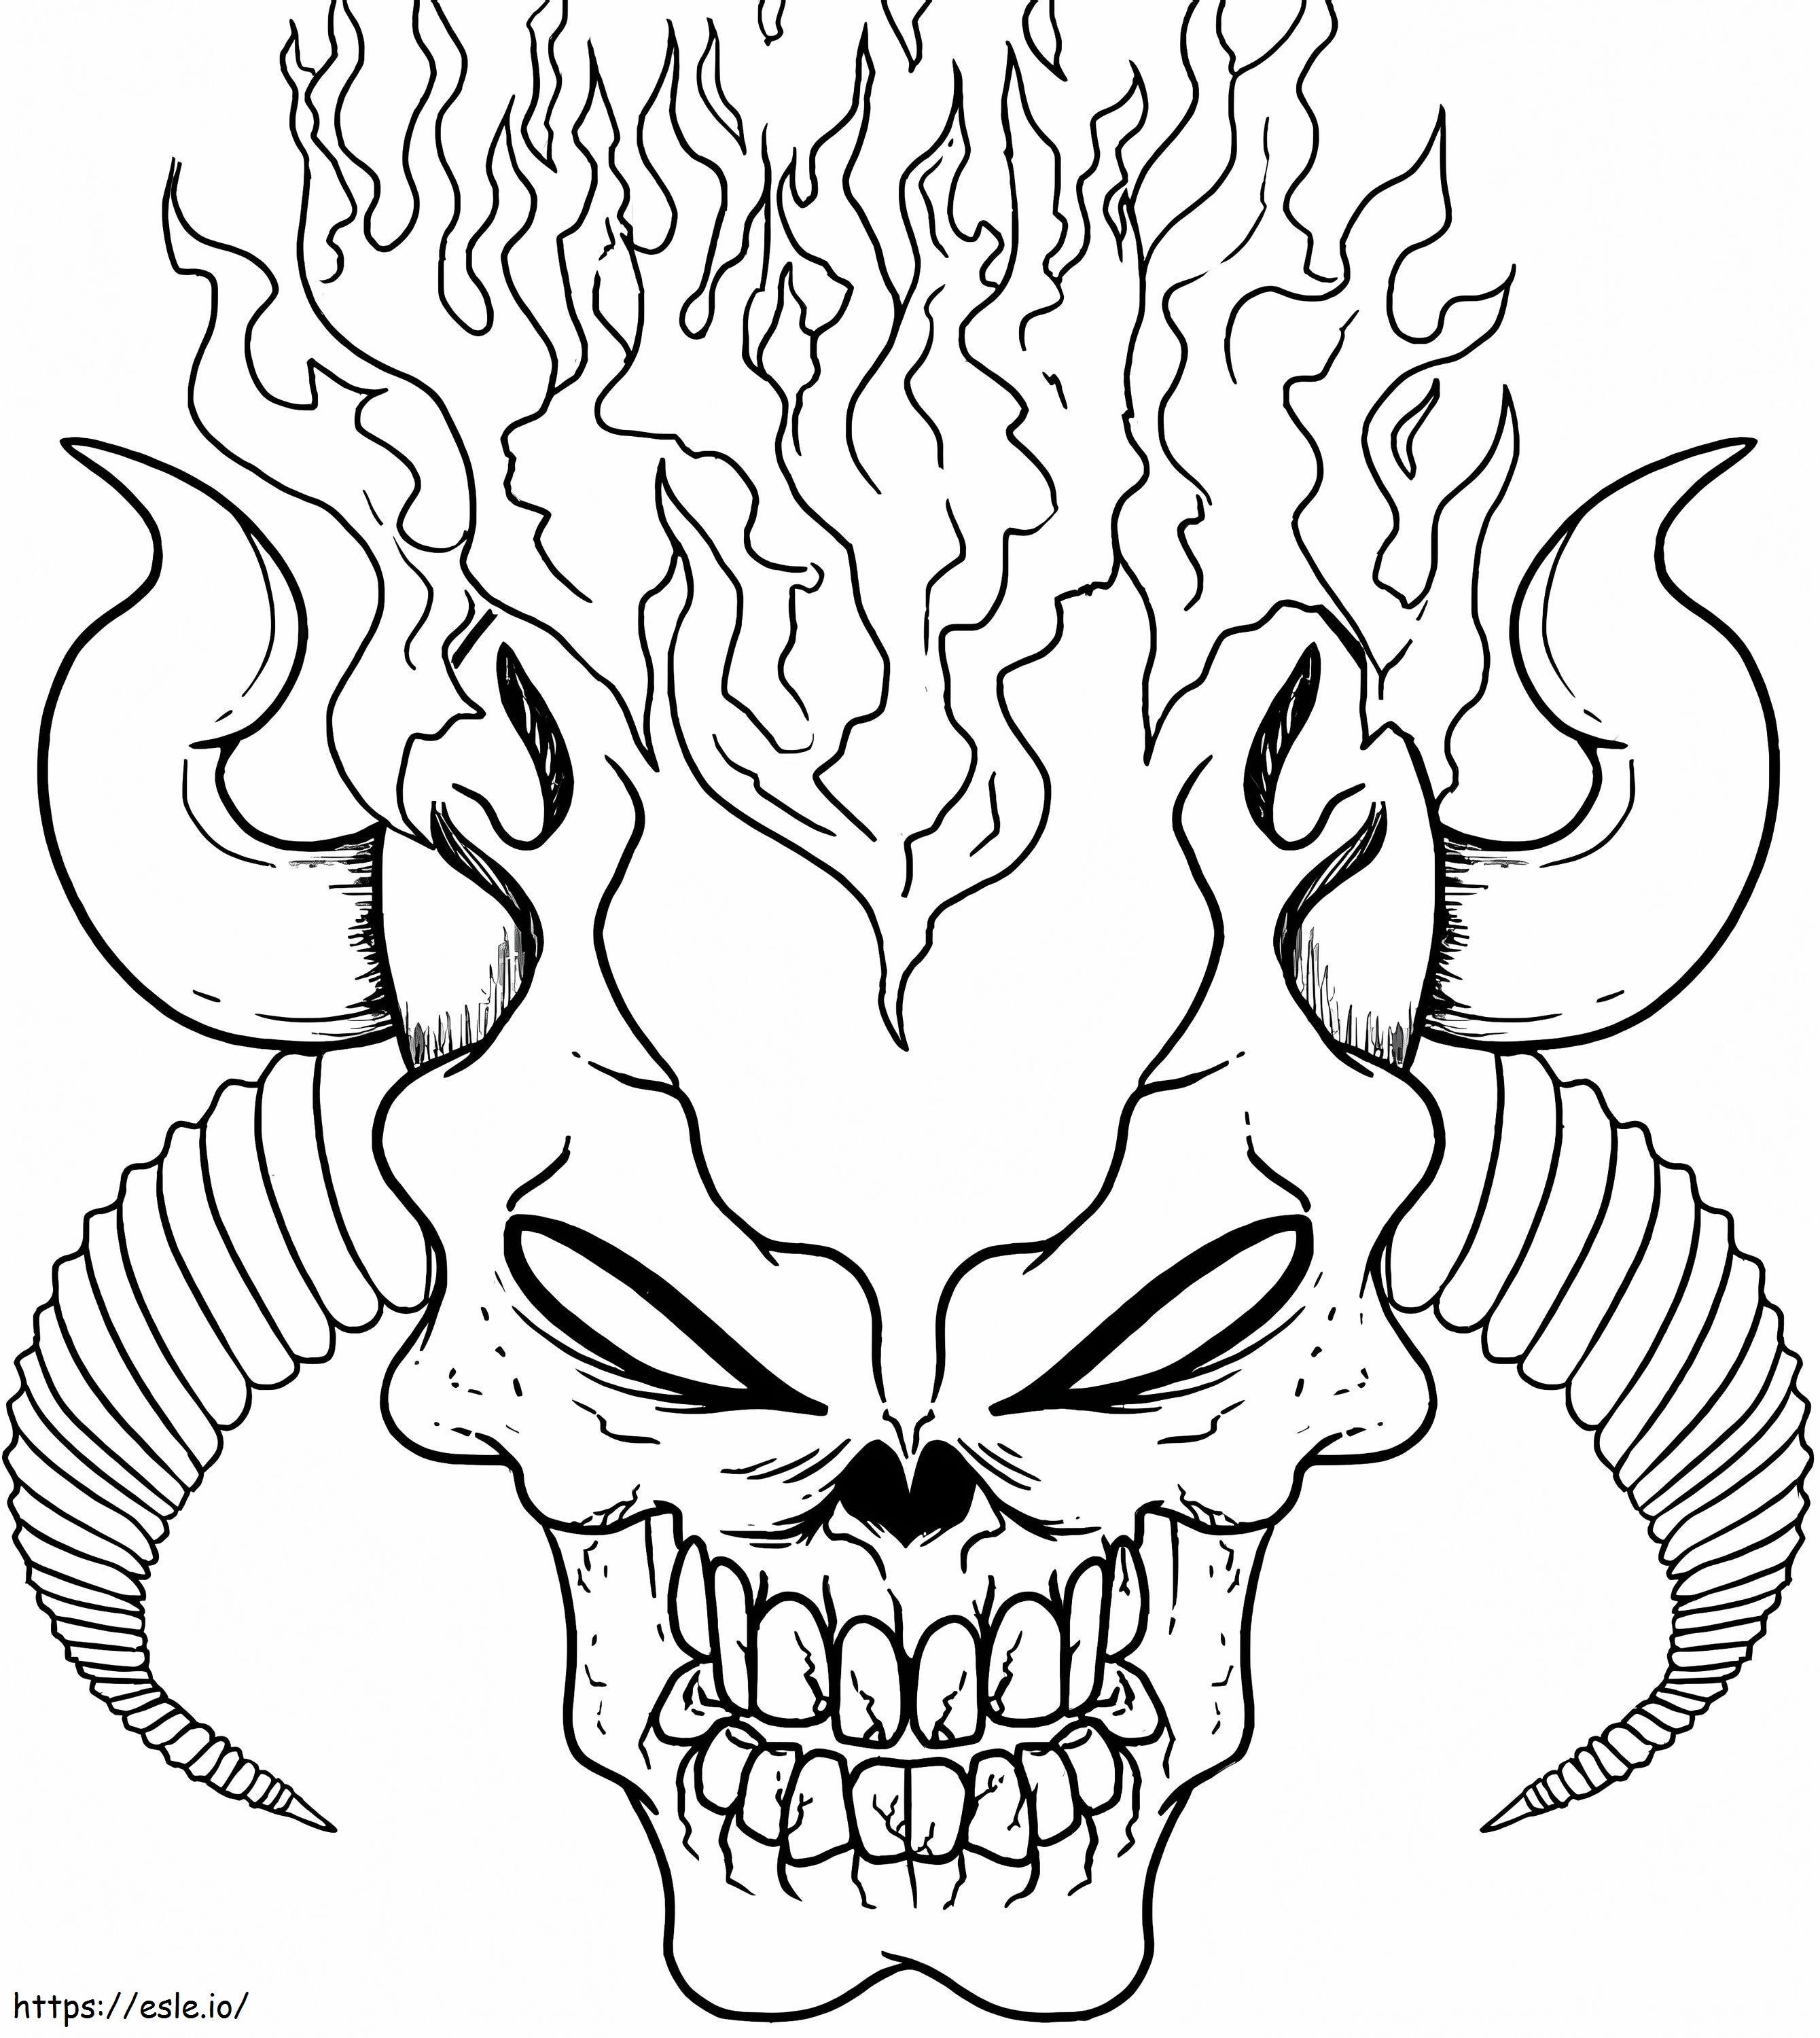 Horror Skull coloring page